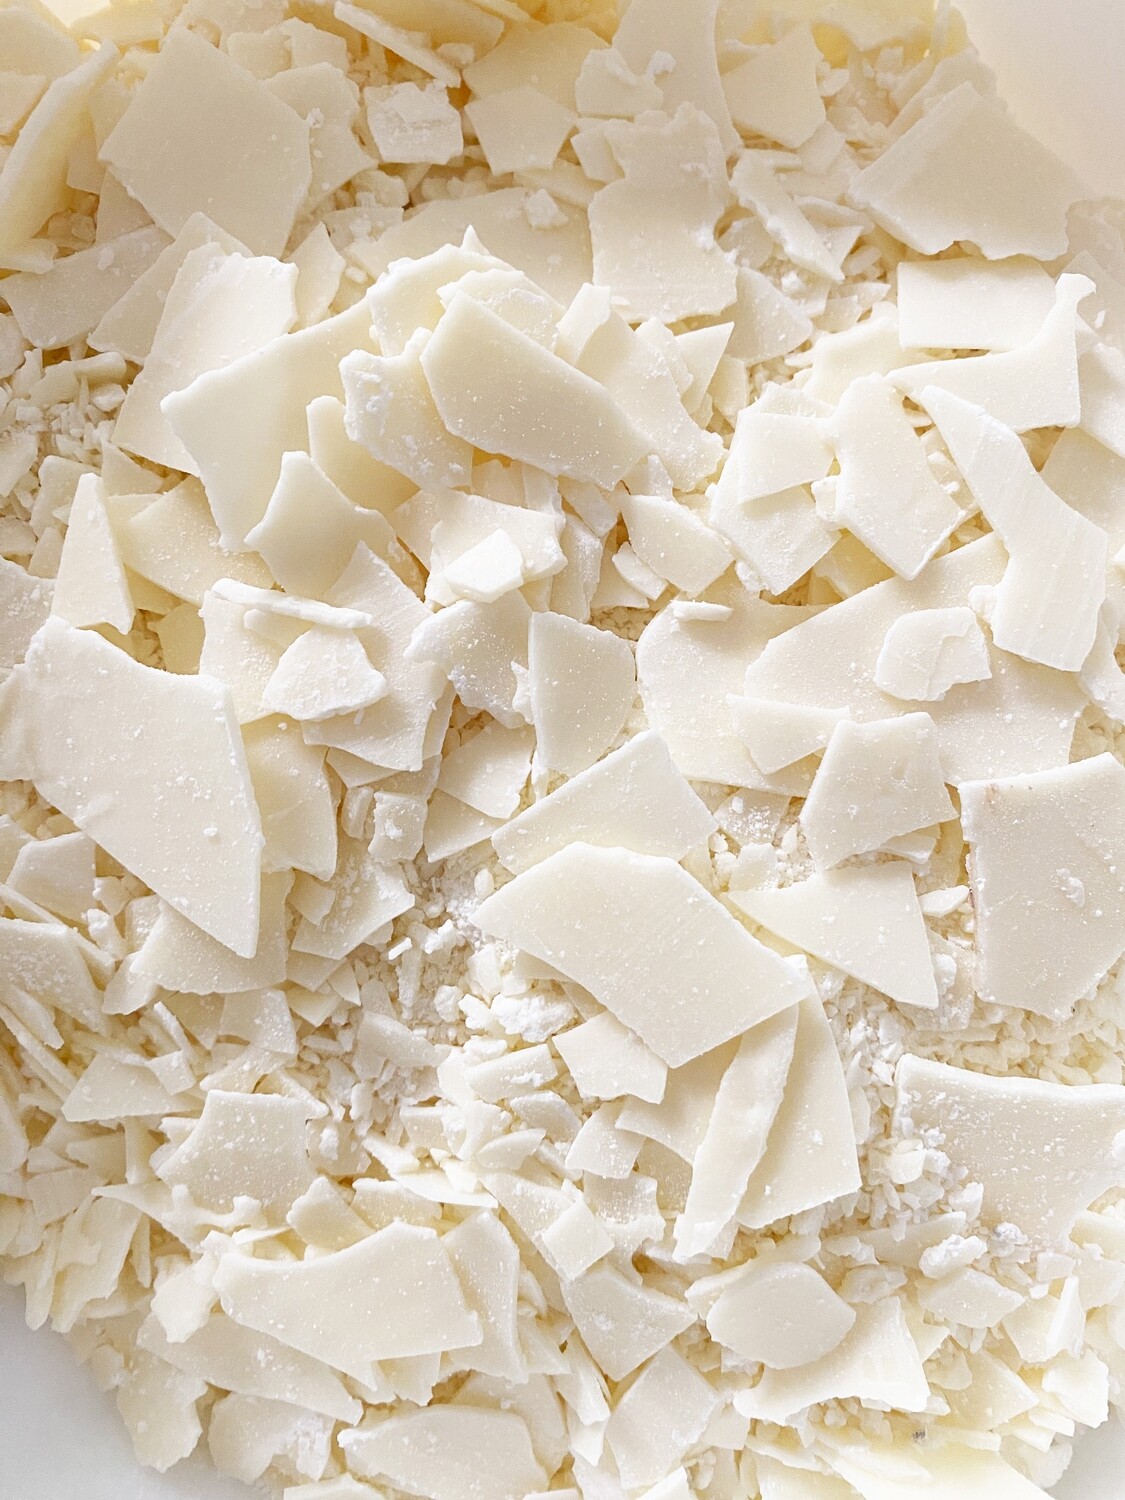 Compound Chocolate Flakes -WHITE CHOCOLATE FLAVOUR 1 κιλό - Απομίμηση Λευκής Σοκολάτας σε Φλέικς